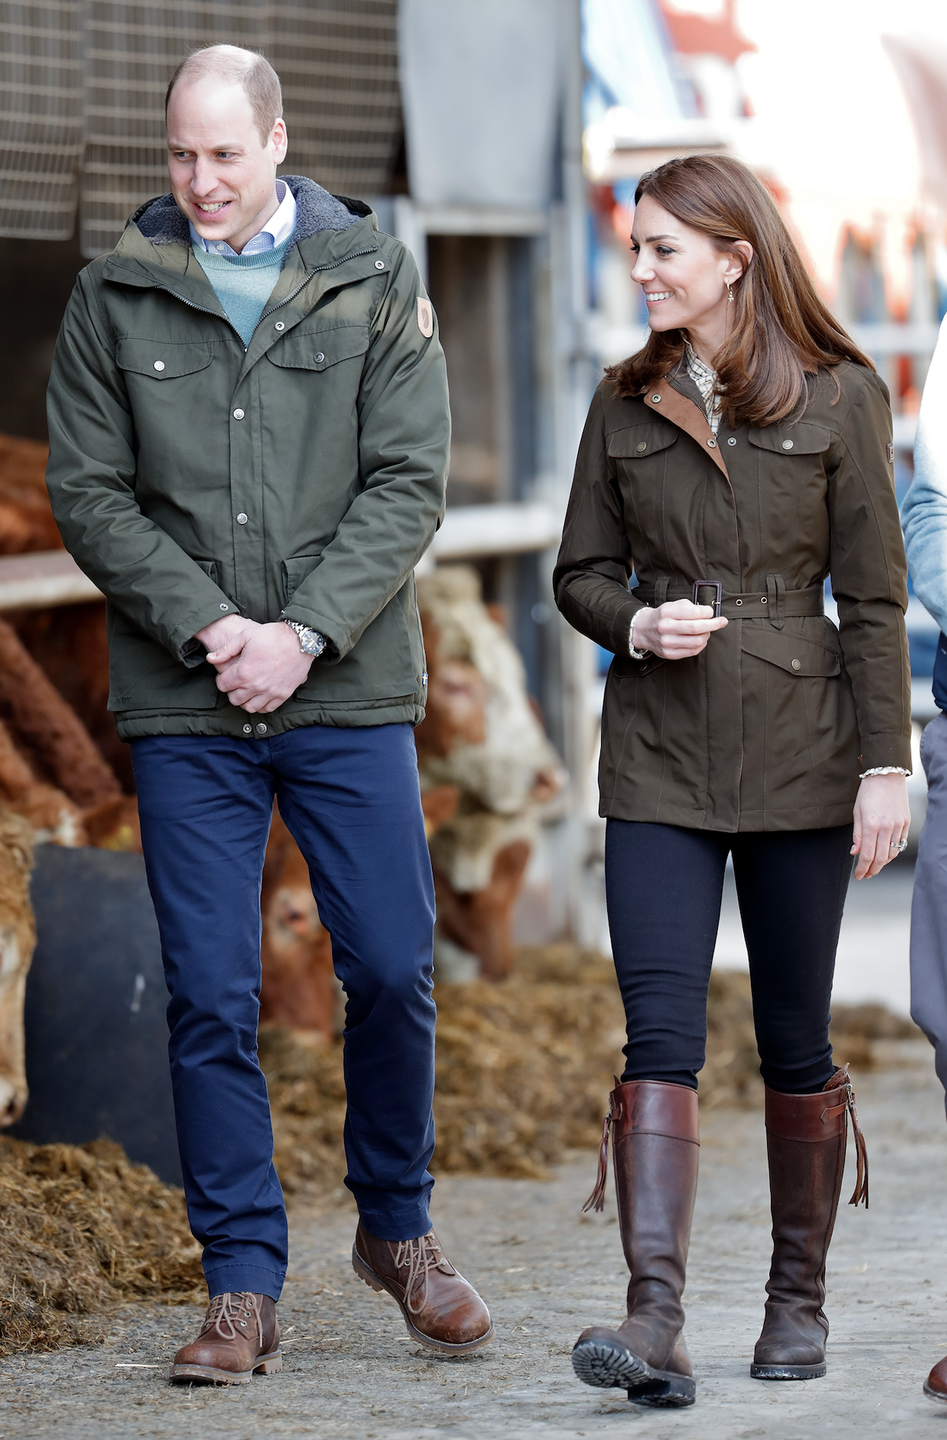 kate middleton and prince william in casual country attire